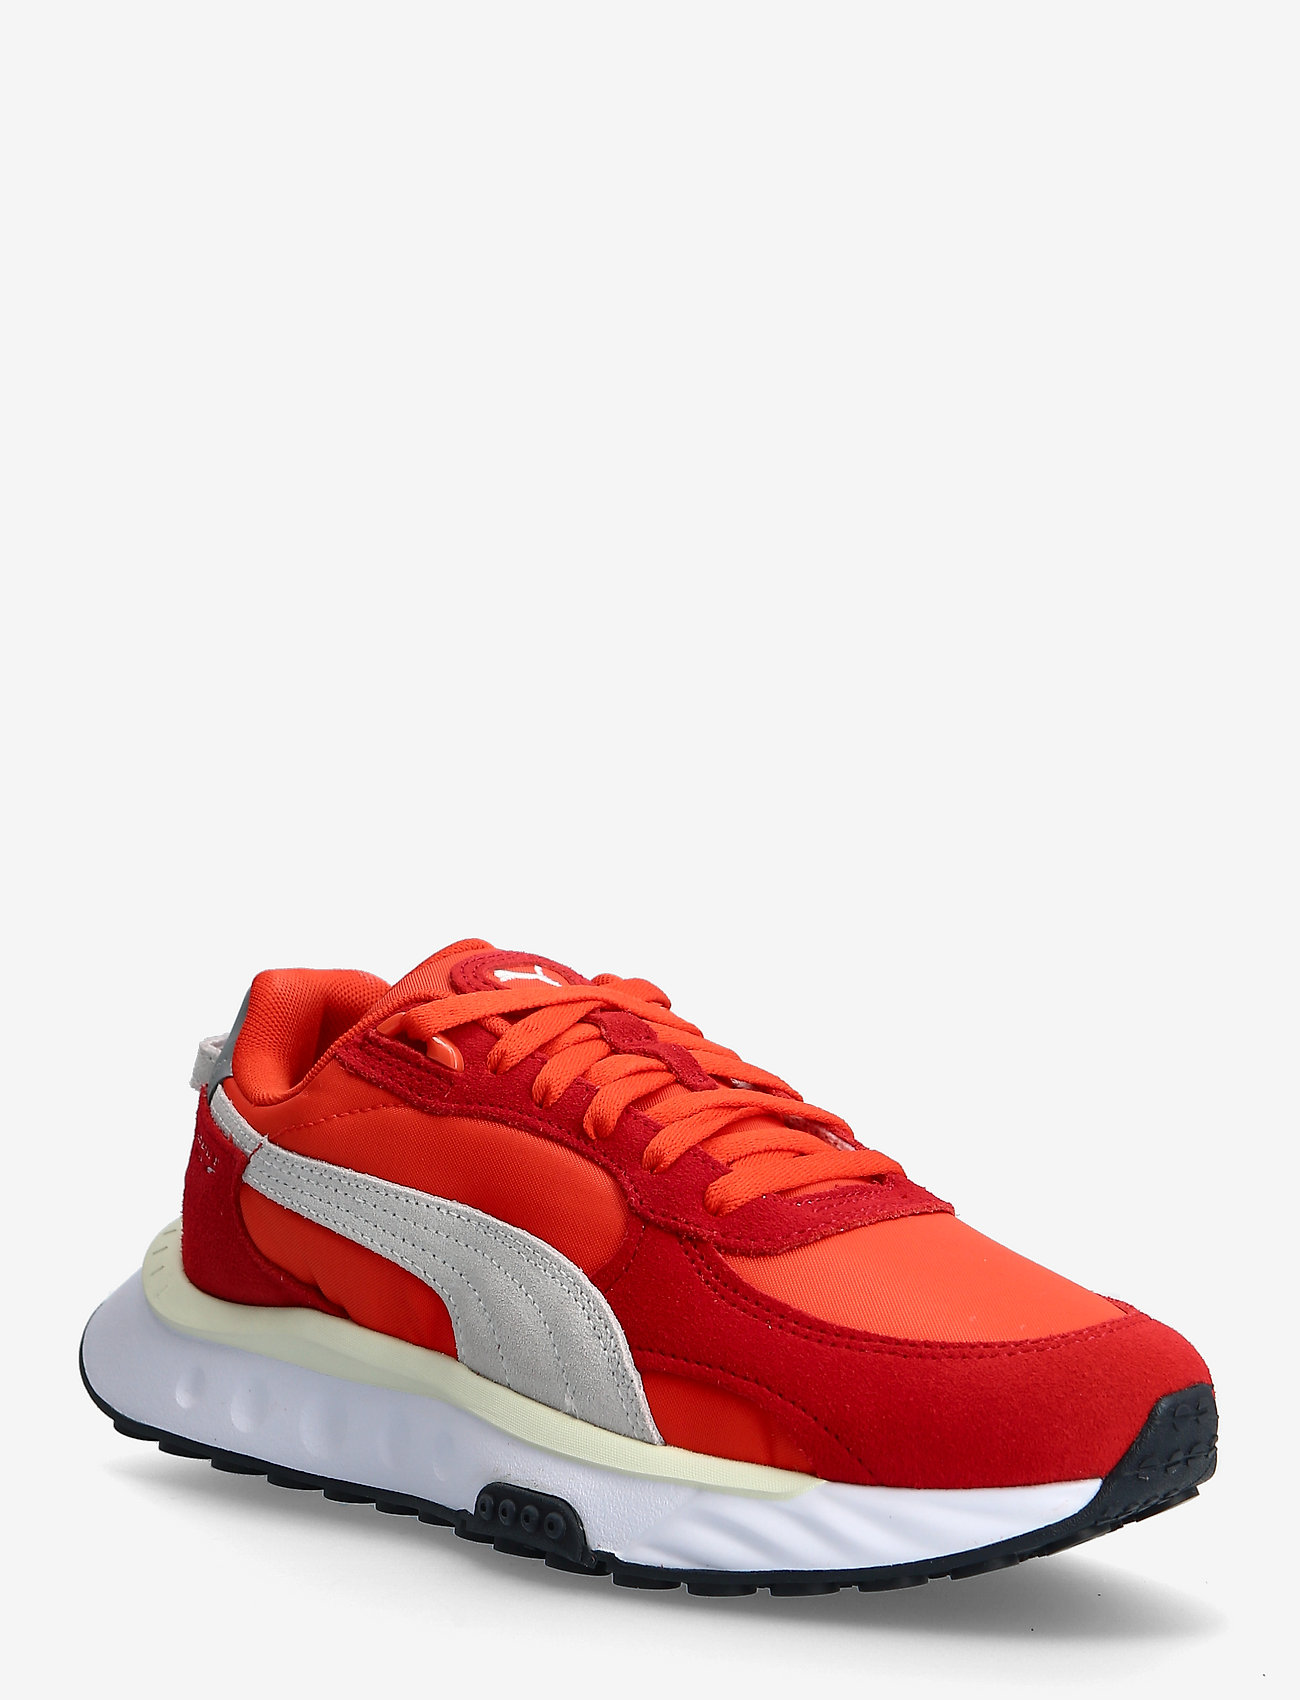 red low pumas